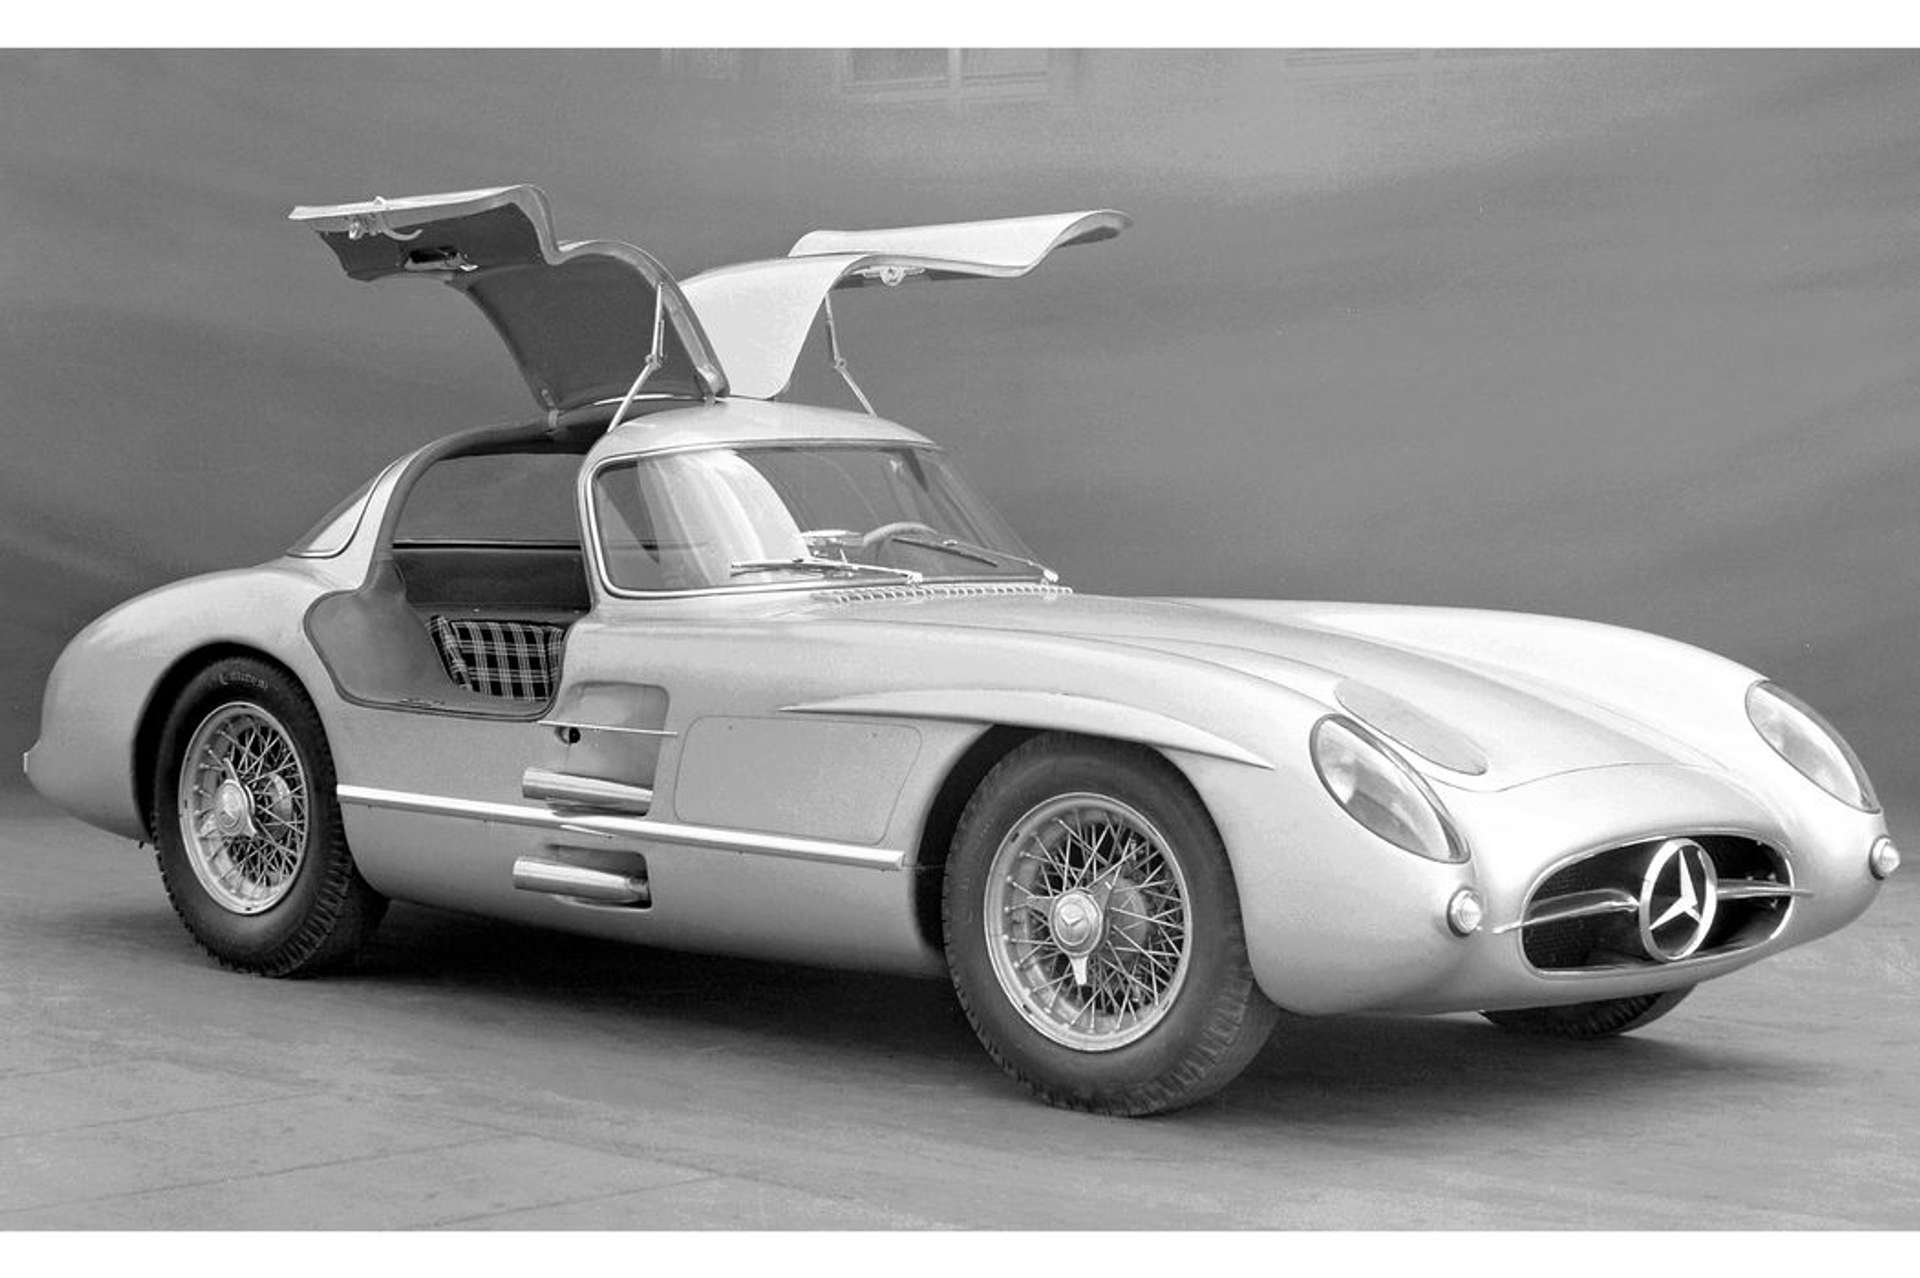 Black and white image of a Mercedes car with the doors open